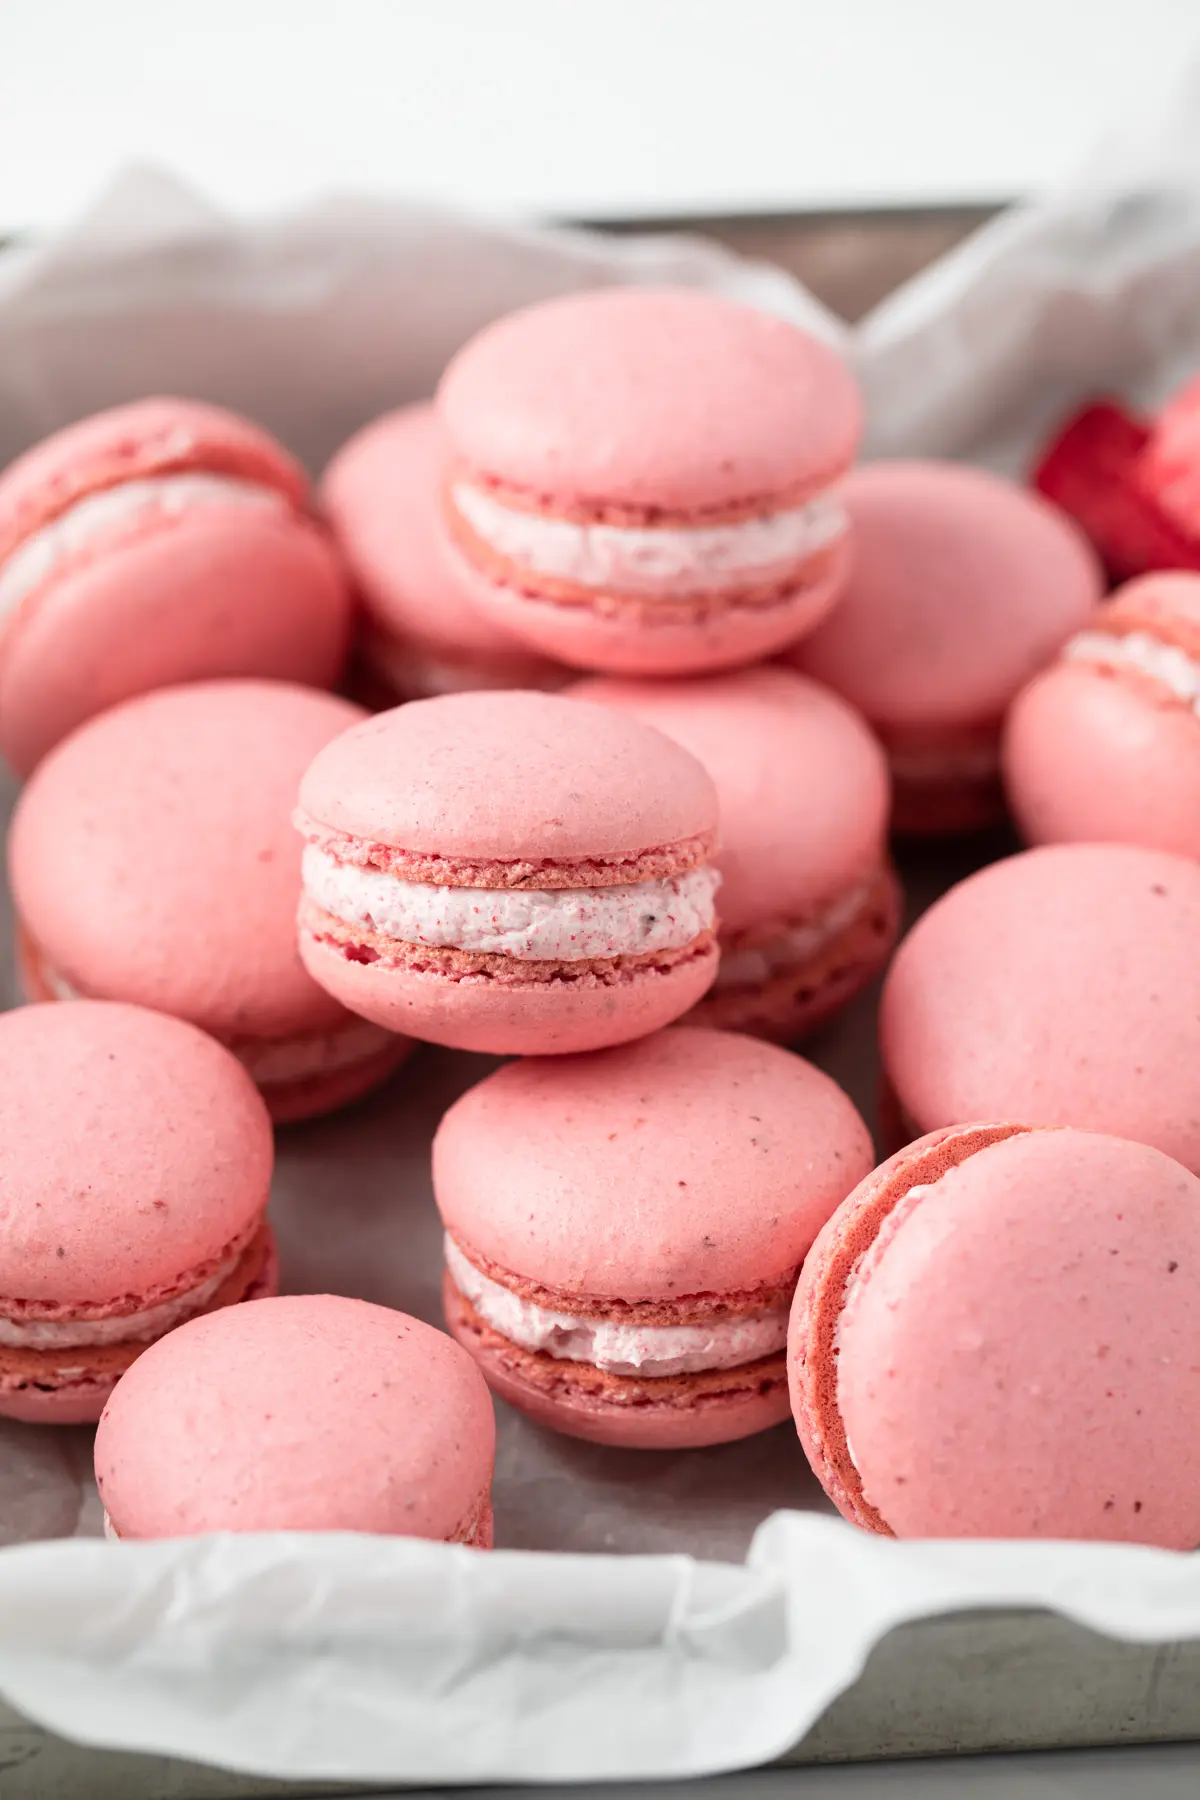 A plate of pink macarons with a white filling. - Macarons, bakery